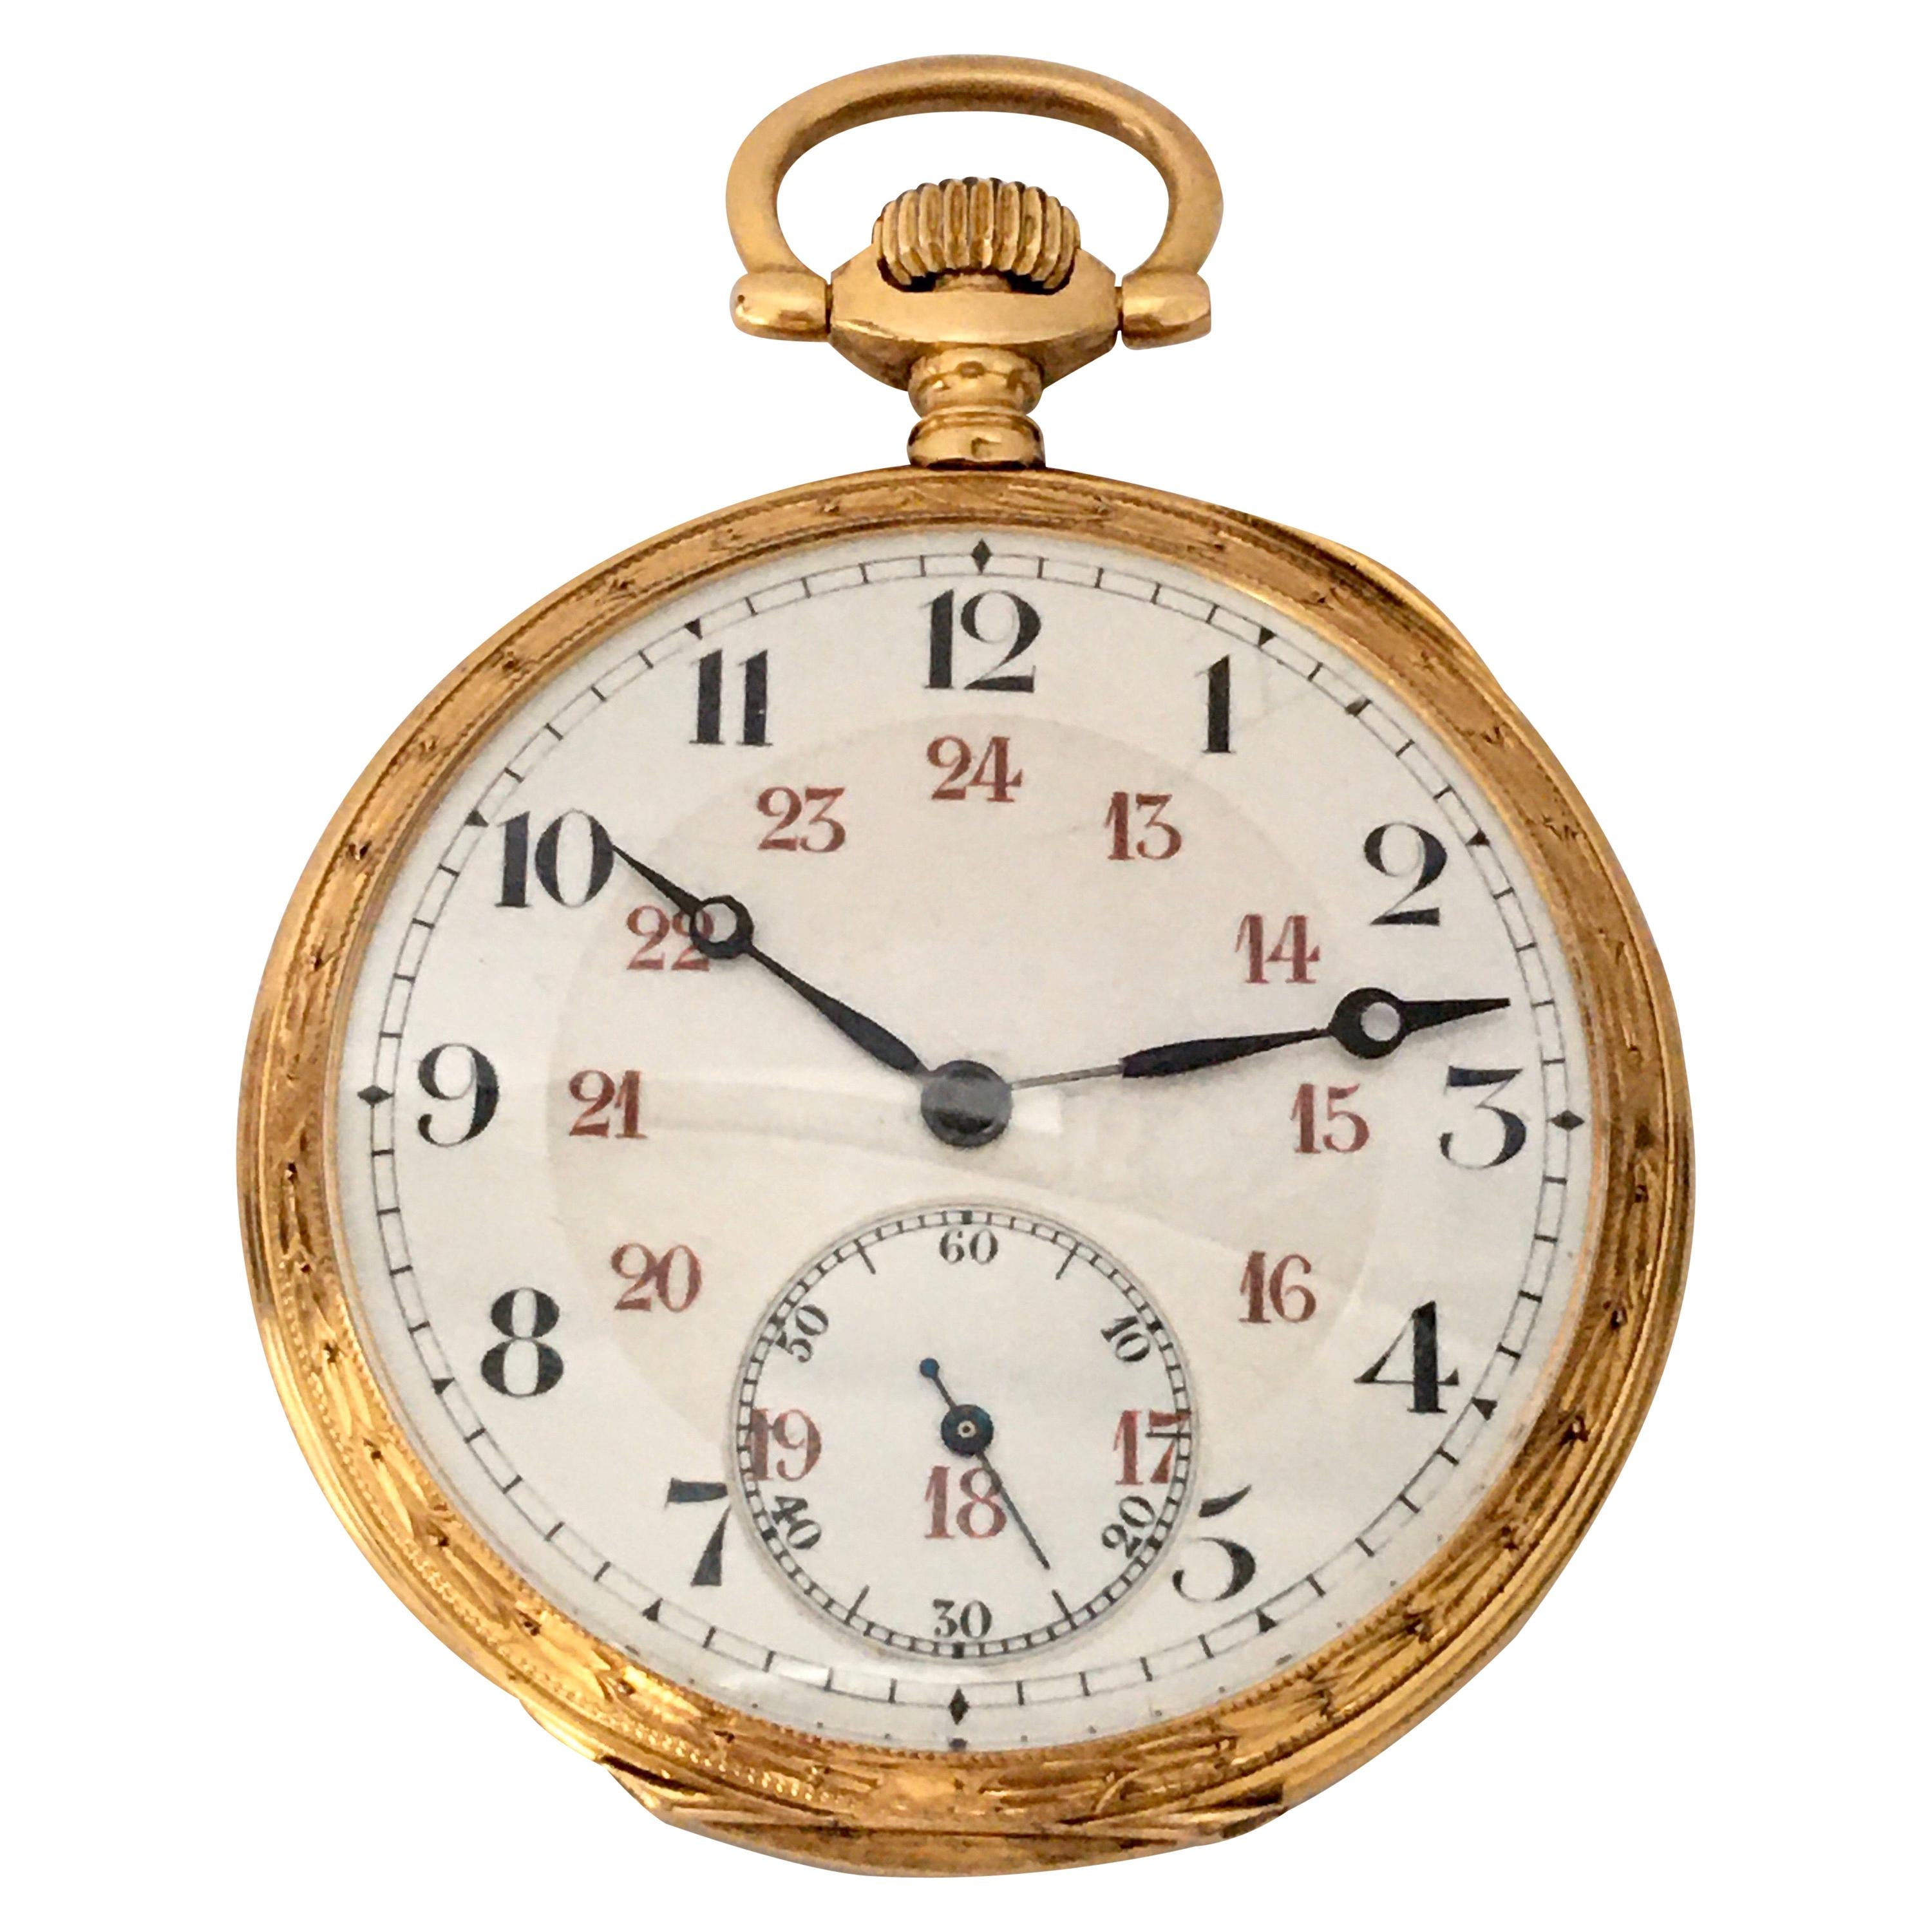 This beautifully 18K Gold Full engraved case antique Dress Pocket Watch is in good Working condition and it is recently been serviced and runs well. This watch weighed 64.8 grams and and measured 50mm case diameter excluding crown. 

Please study